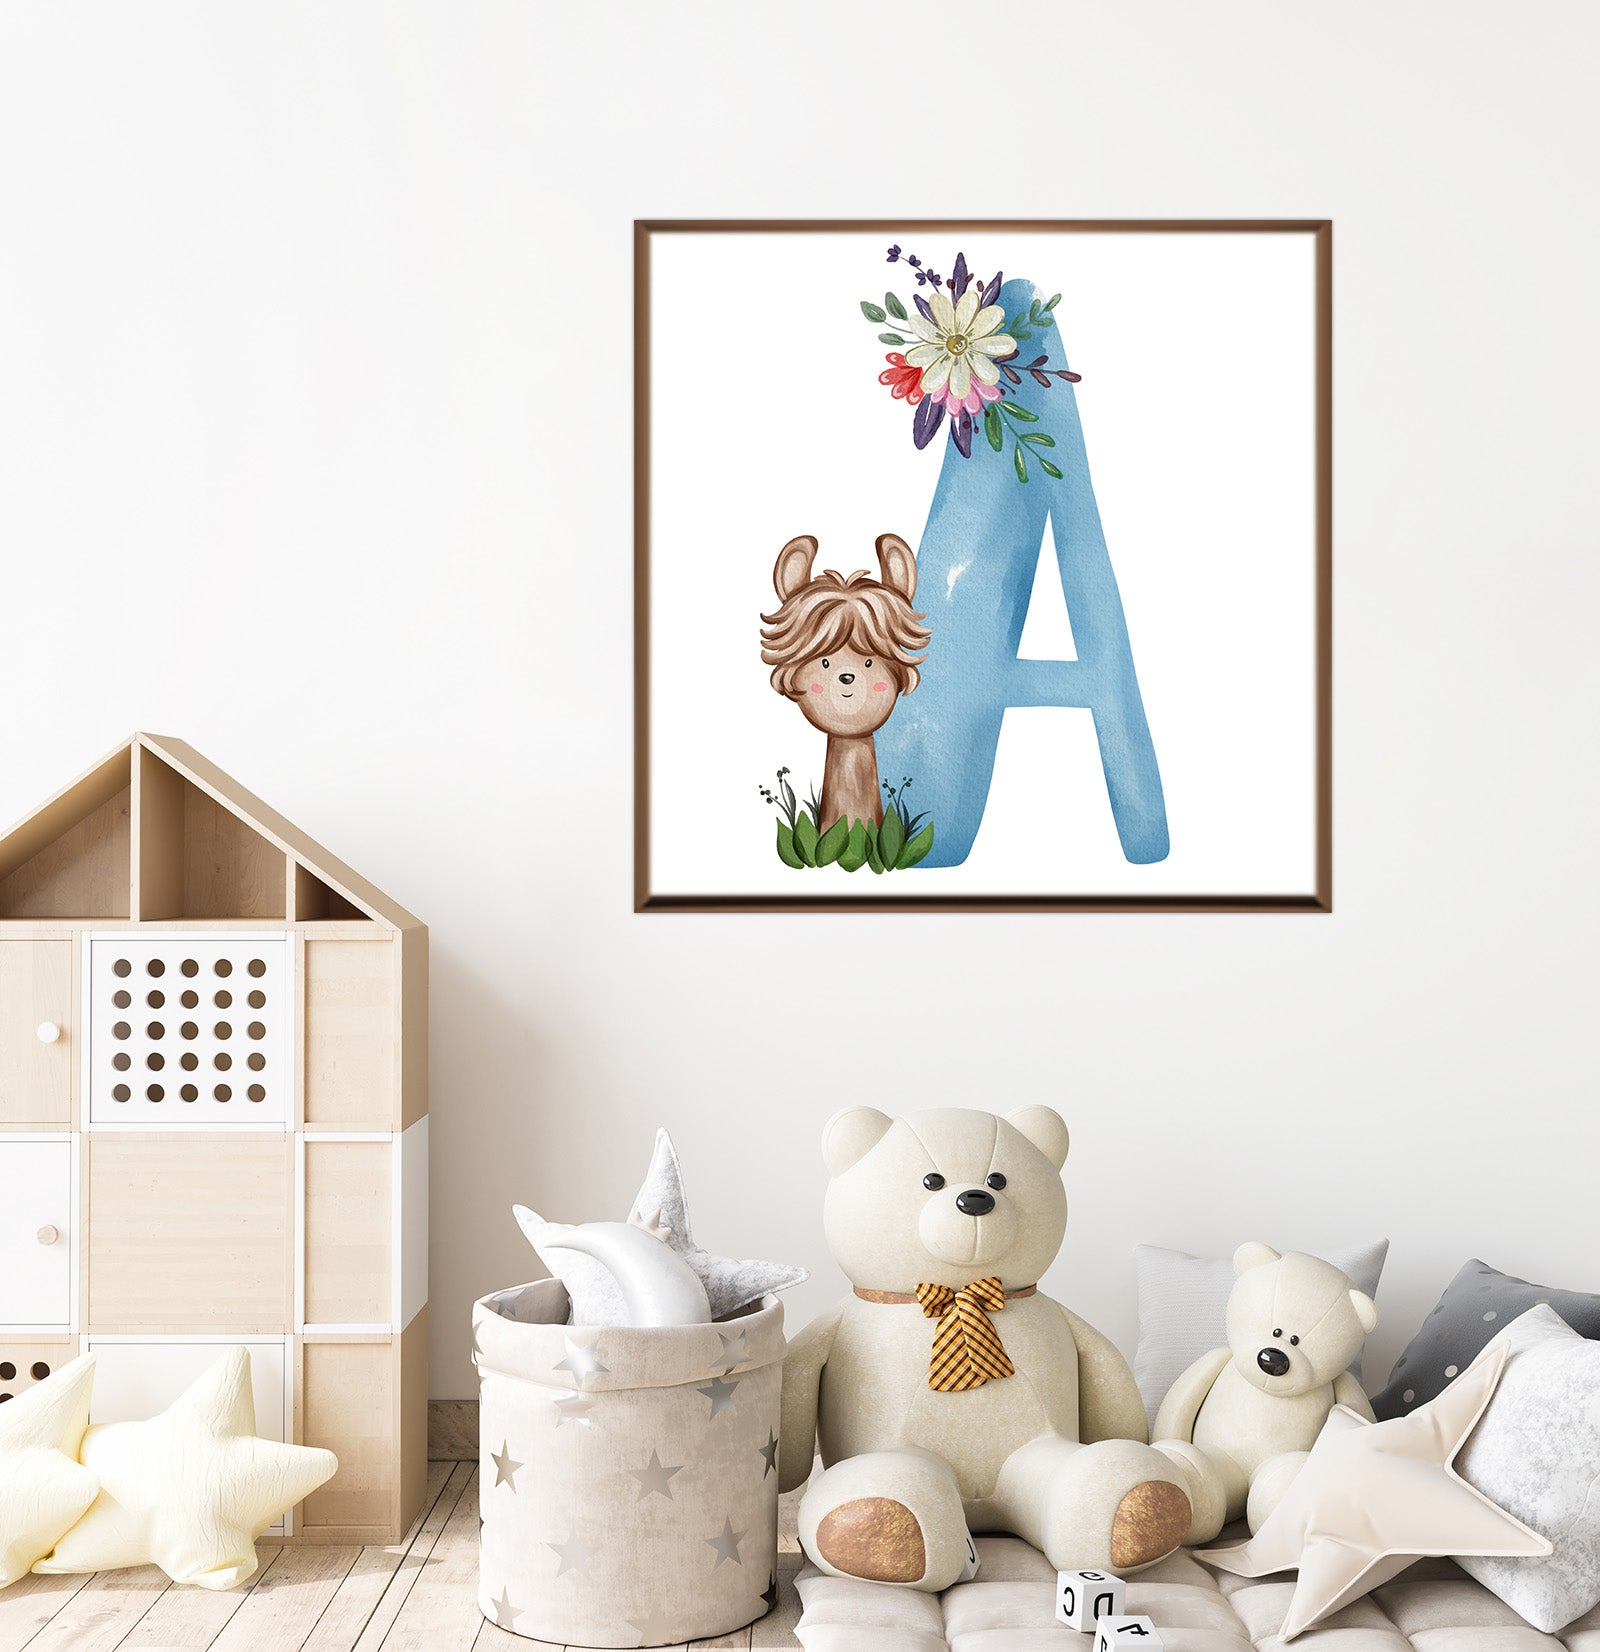 Wall Art For Kids' Room (Letter A)